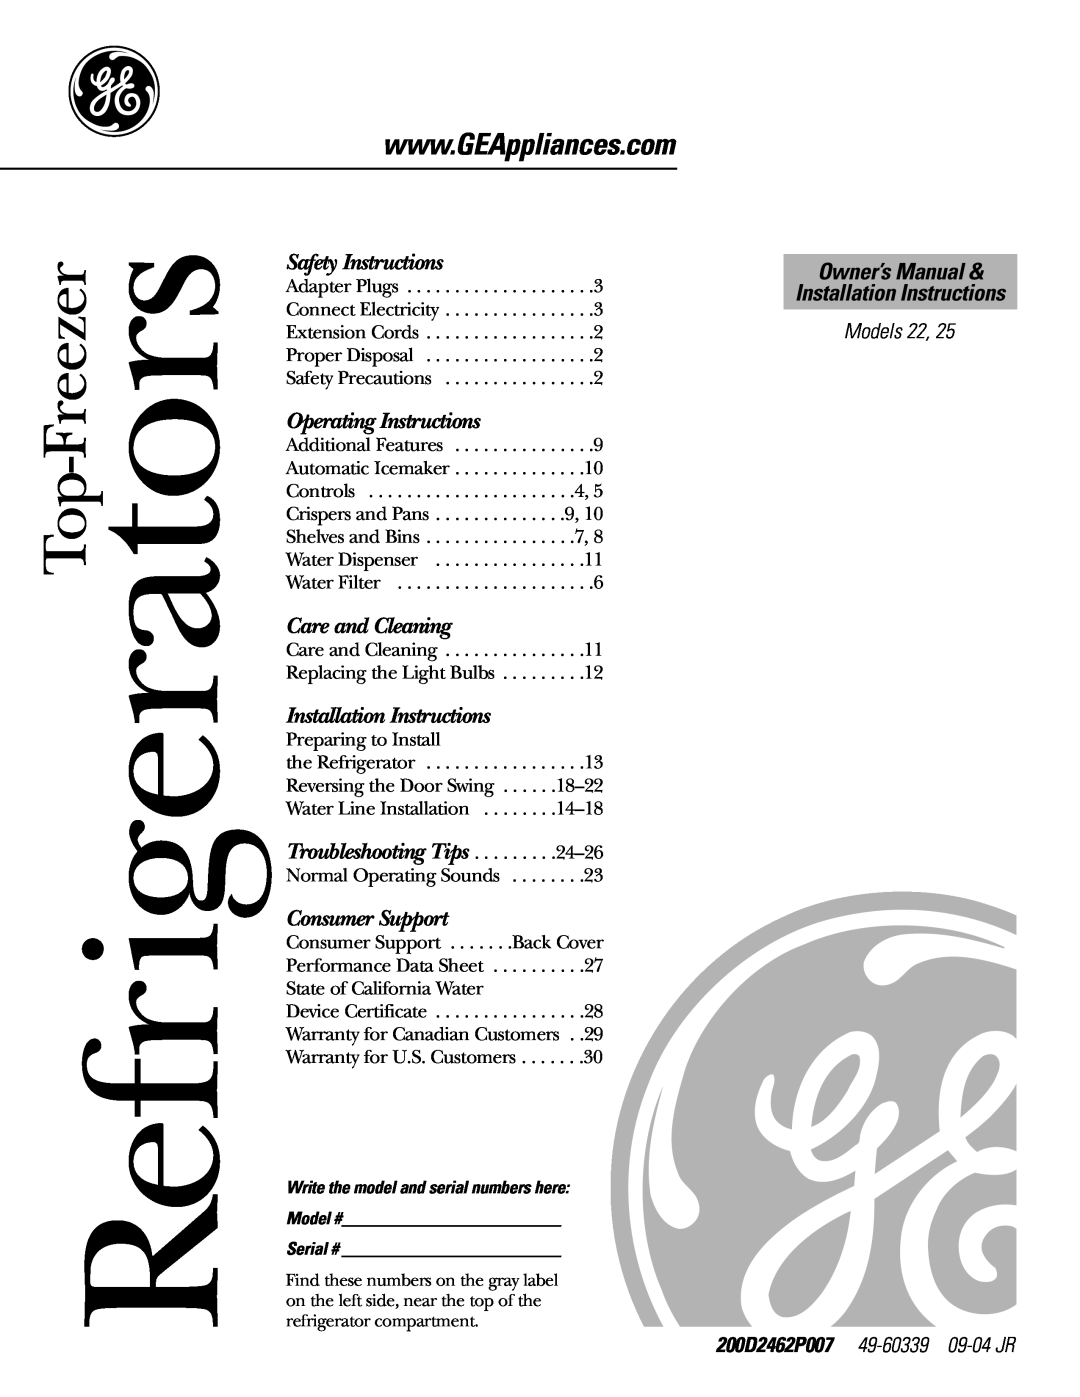 LG Electronics 25, 22 owner manual Refrigerators, Safety Instructions, Operating Instructions, Care and Cleaning 